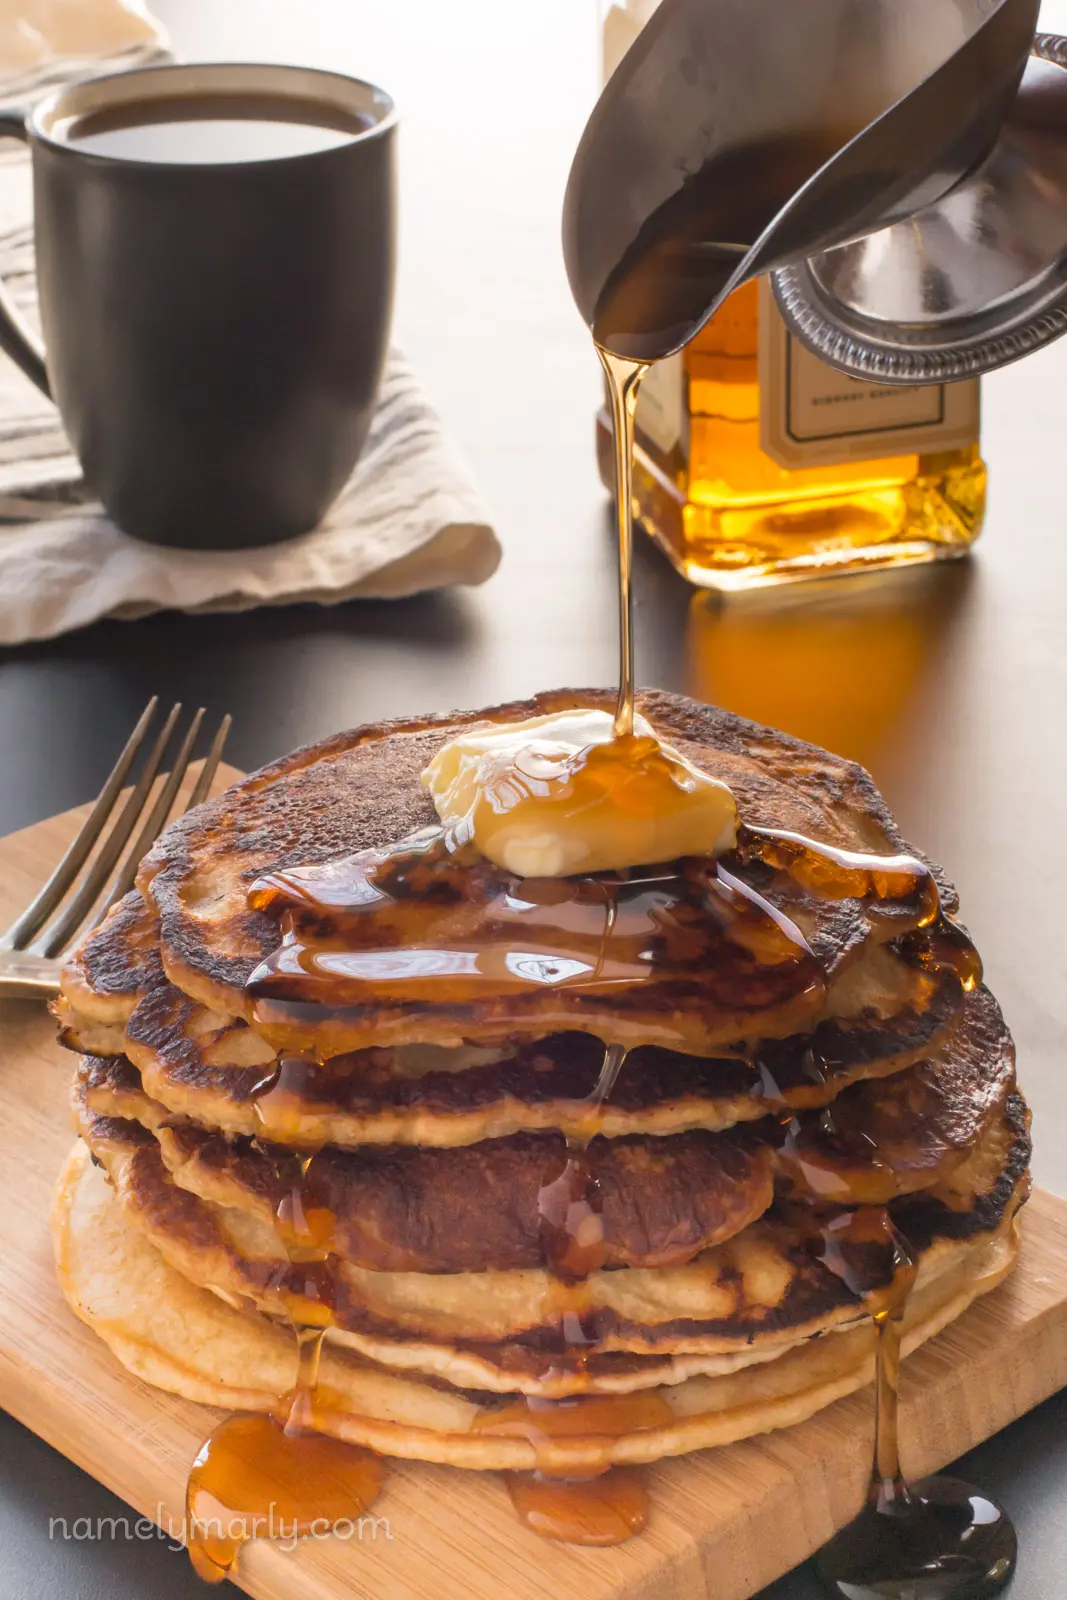 Pouring syrup over vegan pancakes with a mug of tea behind it.